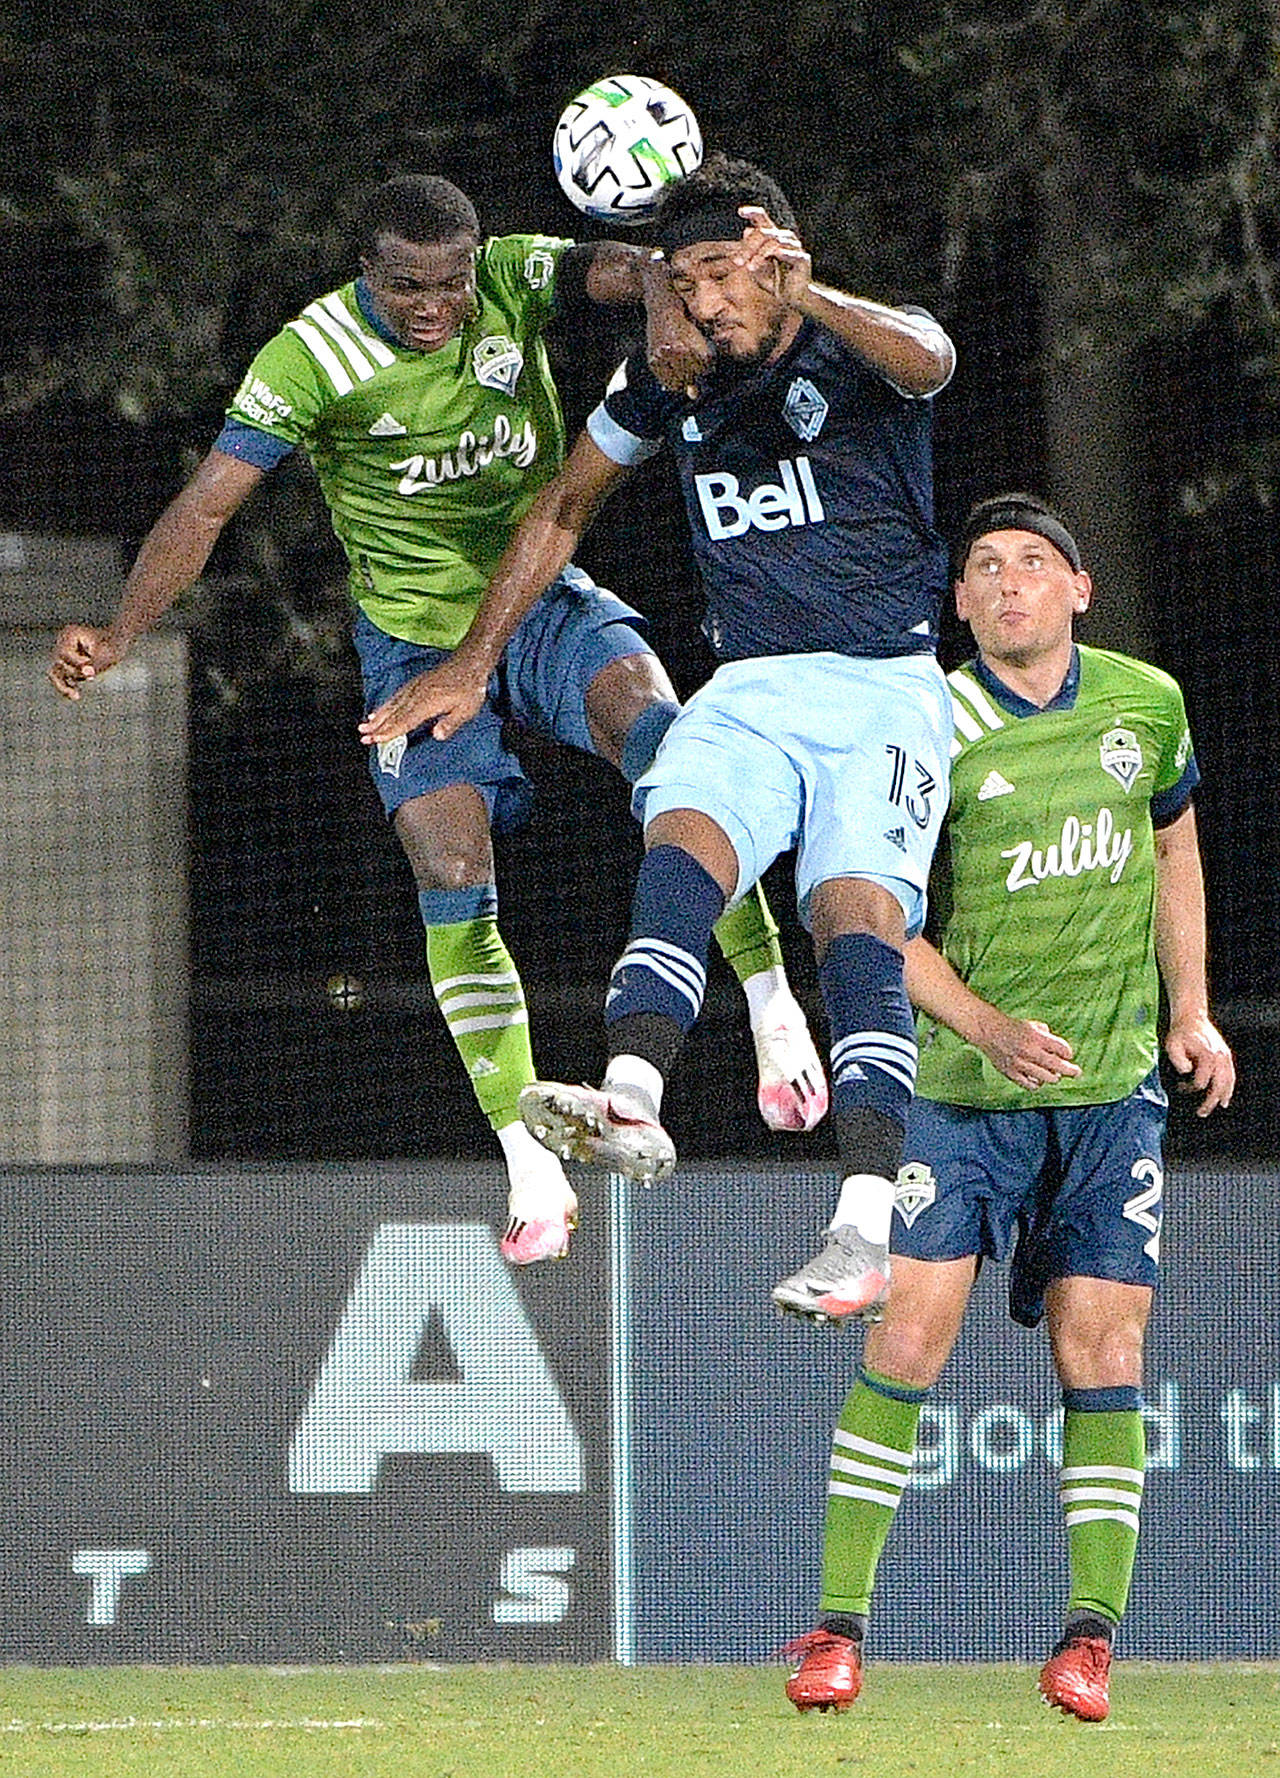 Seattle Sounders defender Shane O’Neill, right, watches as defender Nouhou Tolo, left, and Vancouver Whitecaps defender Derek Cornelius (13) compete for a header during the second half of an MLS soccer match, Monday, July 20, 2020, in Kissimmee, Fla. (Phelan M. Ebenhack/Associated Press)